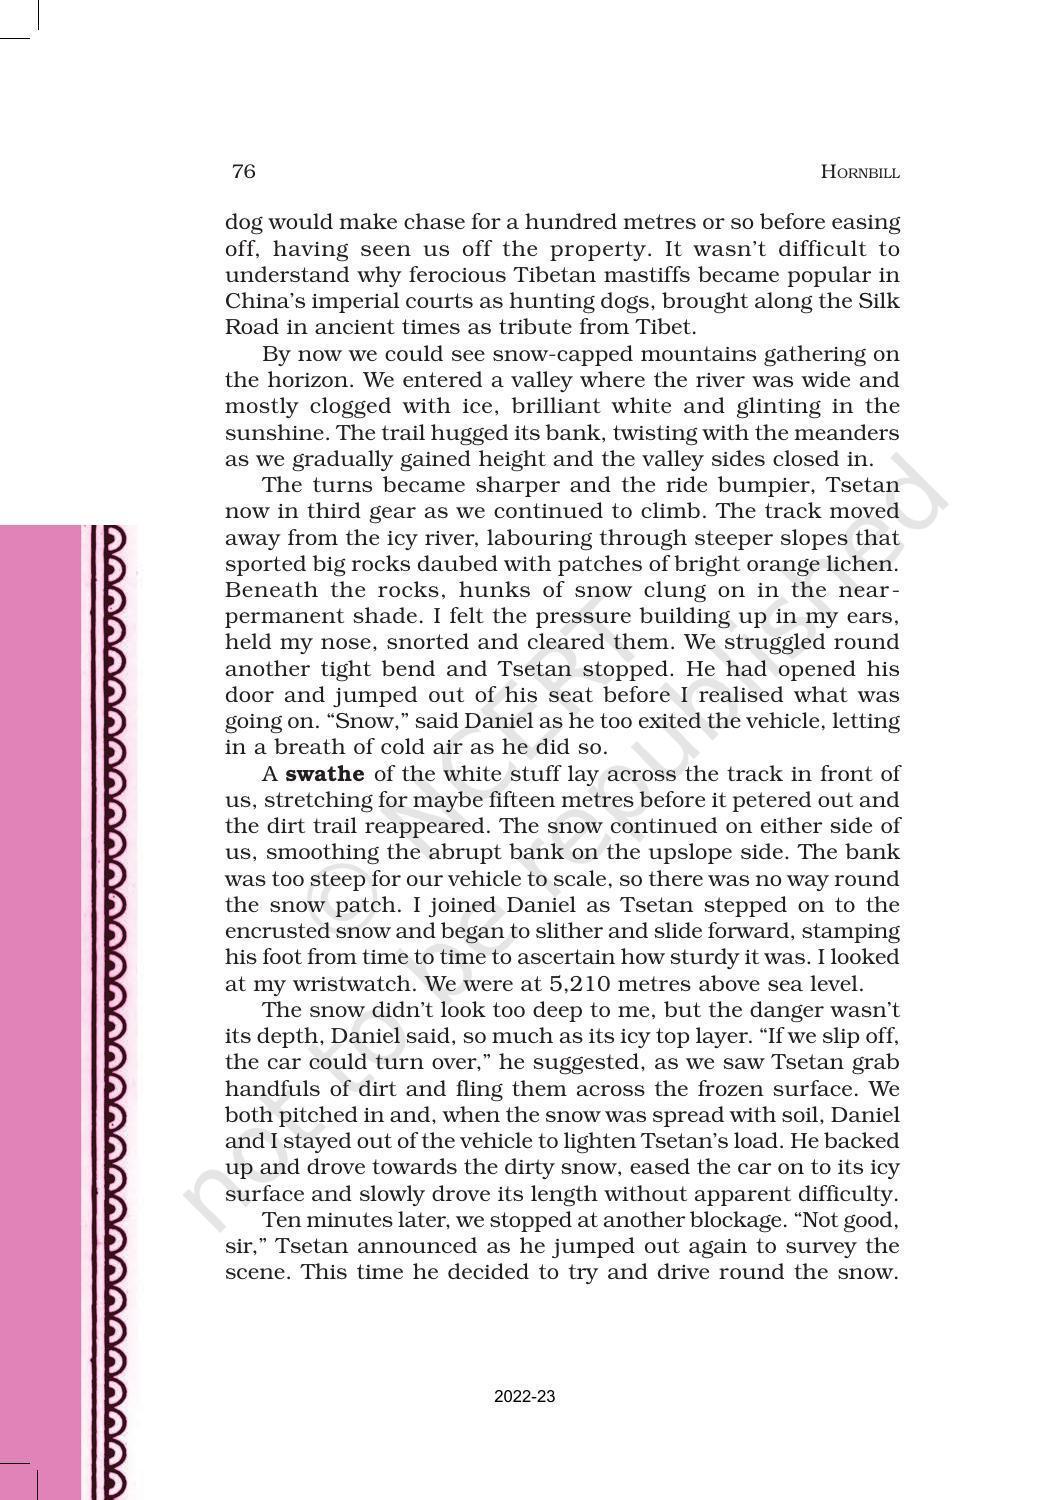 NCERT Book for Class 11 English Hornbill Chapter 8 Silk Road - Page 3